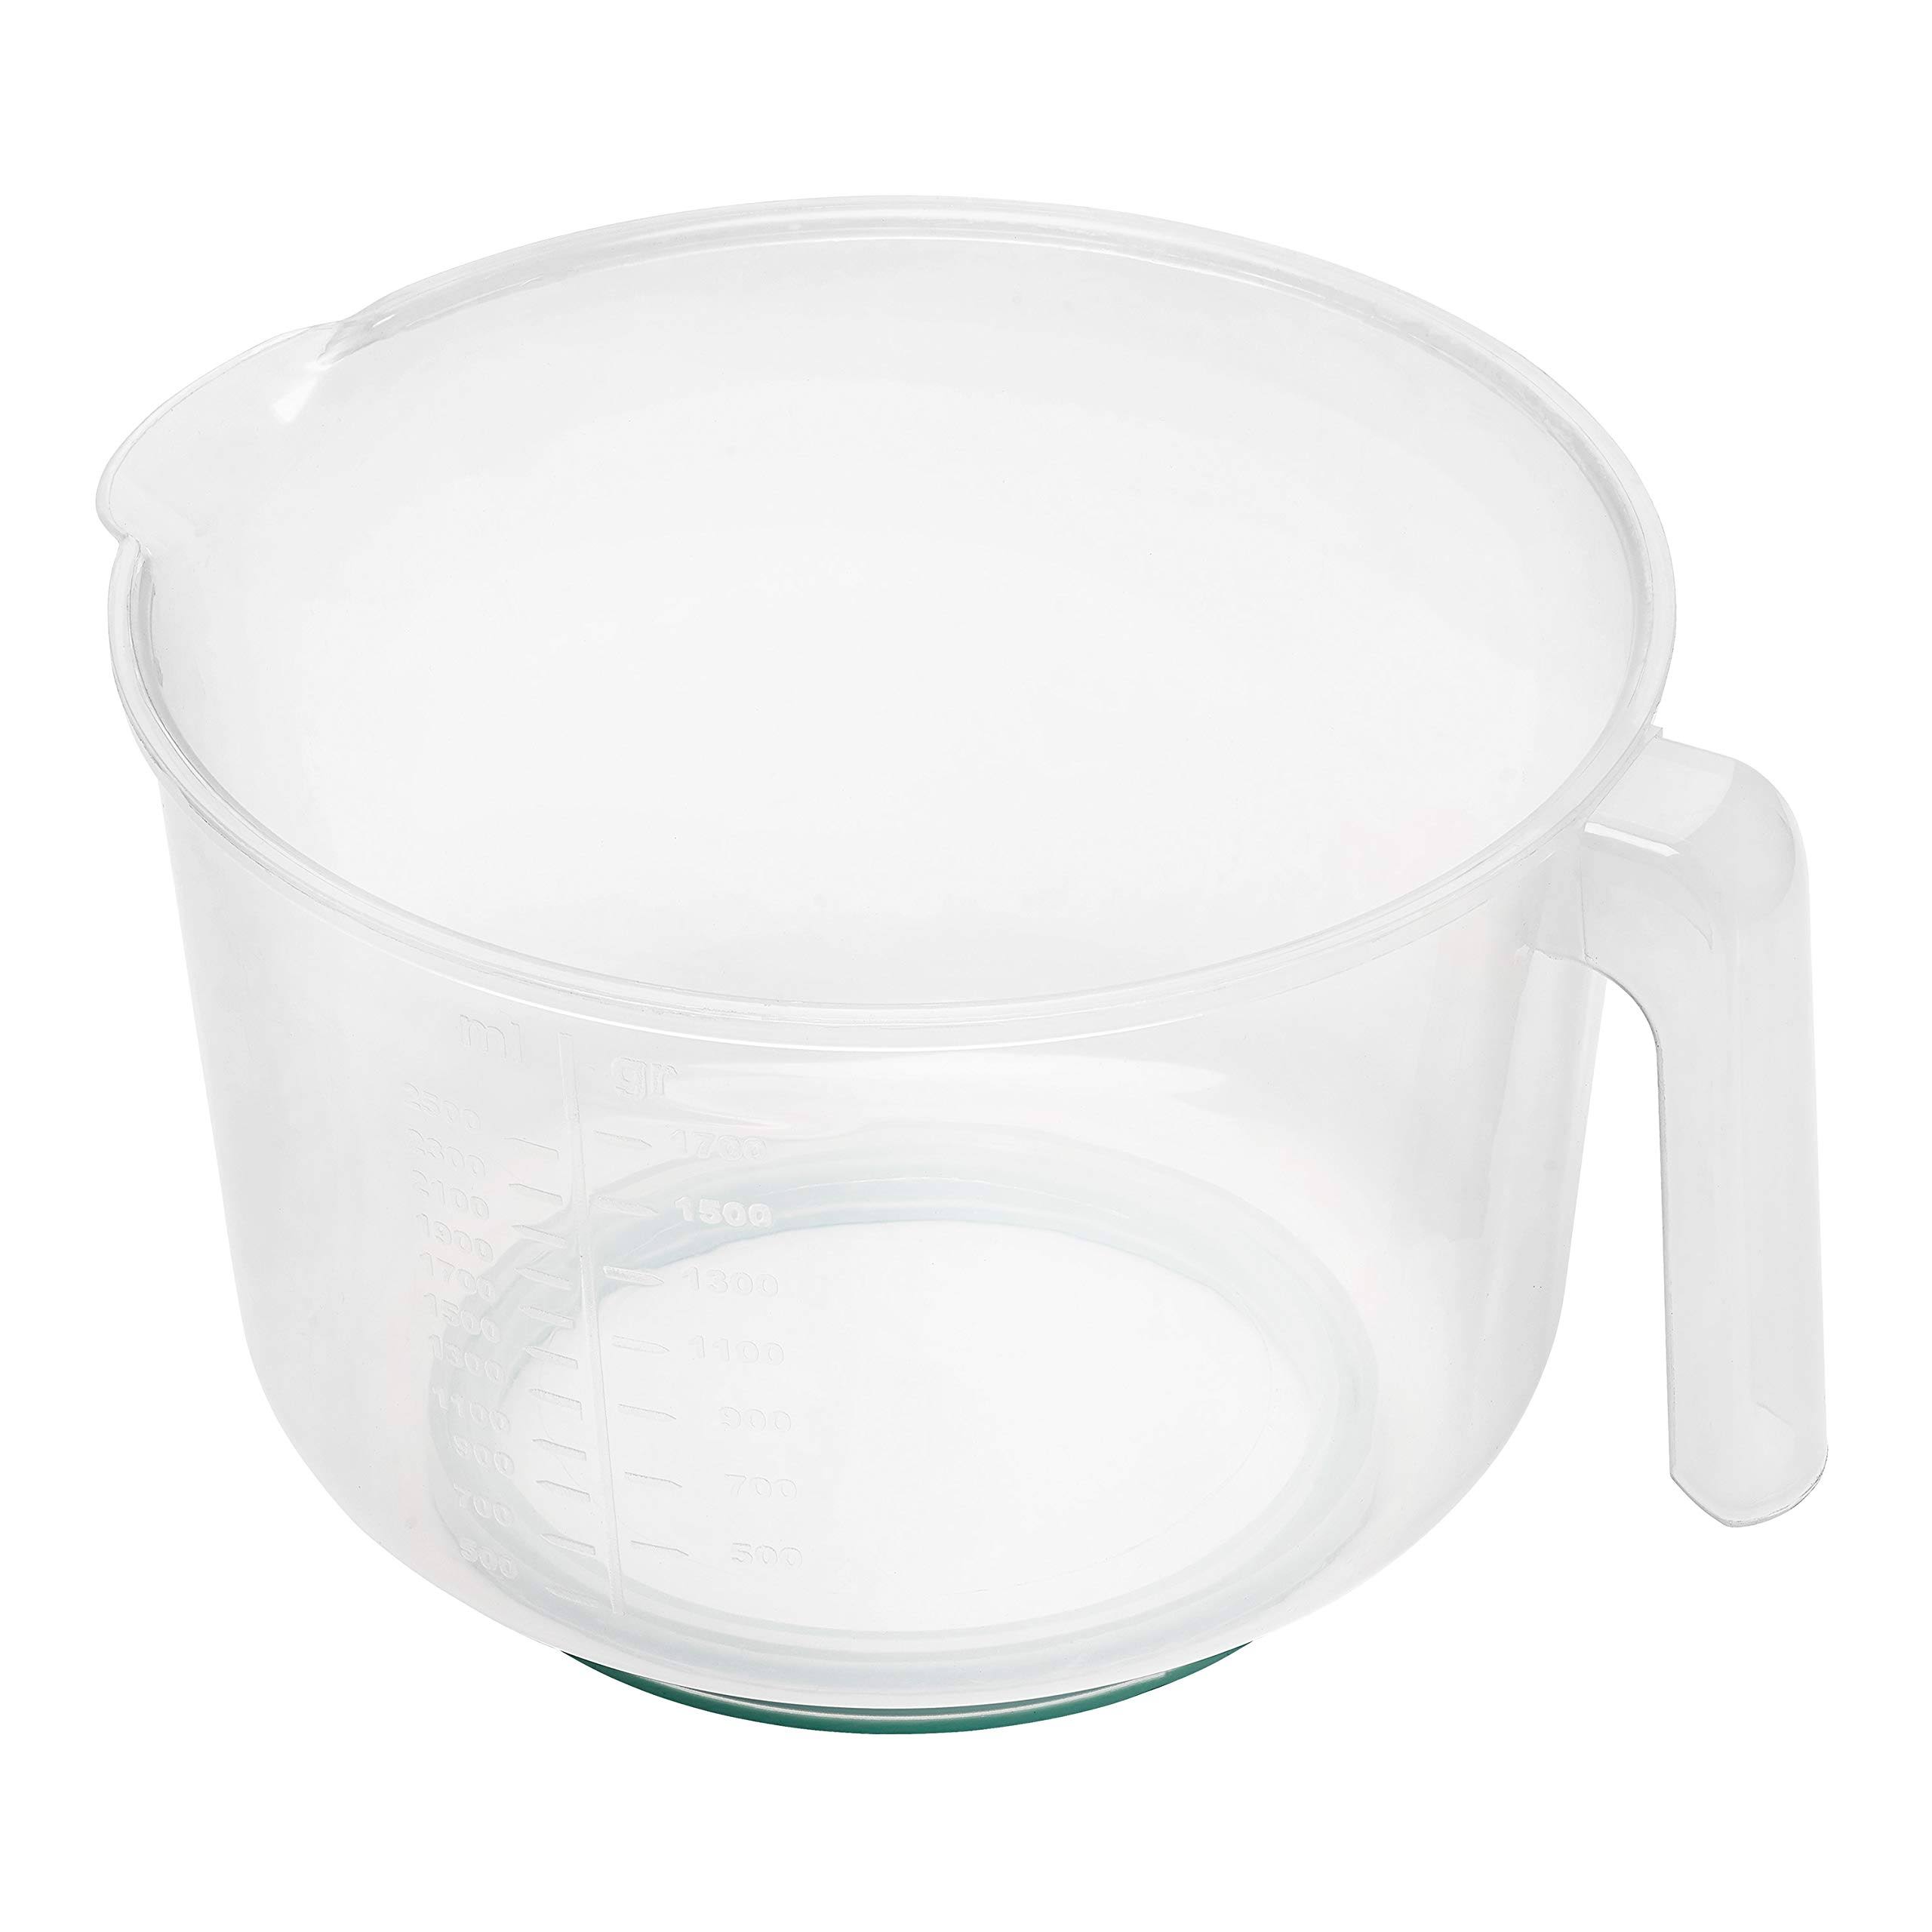 Chef Aid Contain Measuring Jug & Mixing Bowl Microwave & Dishwasher Safe, 2.5L